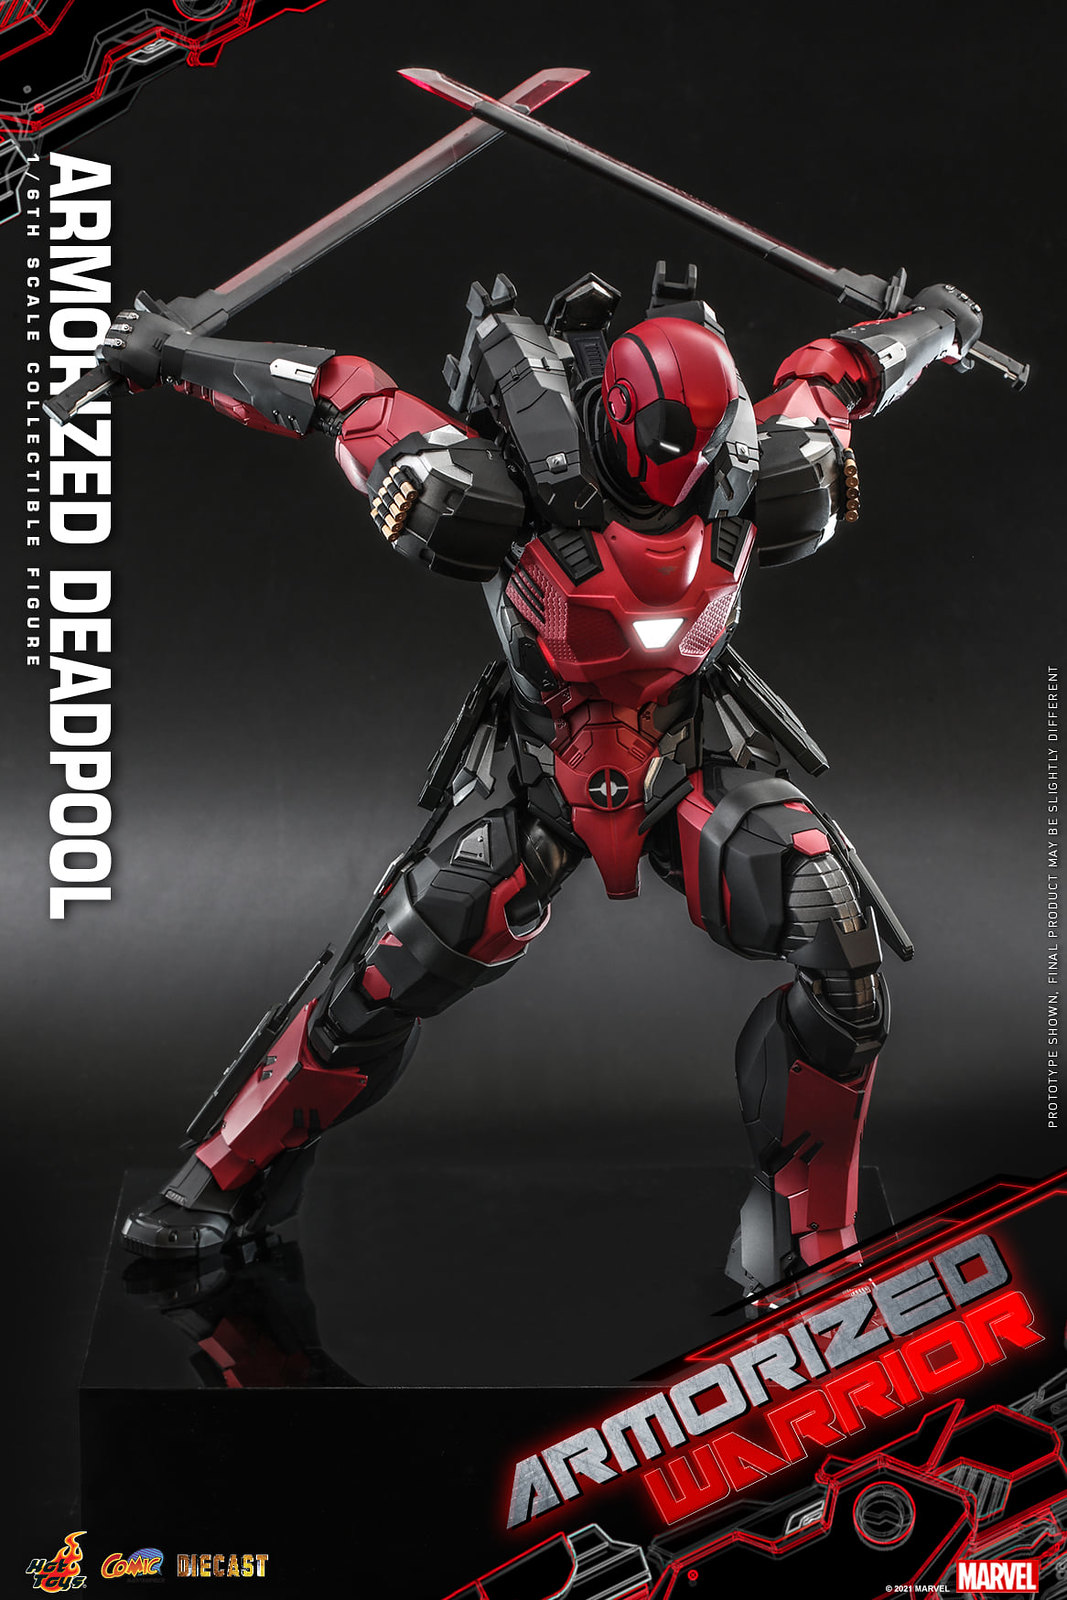 NEW PRODUCT: Hot Toys Armorized Warrior - 1/6th scale Armorized Deadpool Collectible Figure [Armorized Warrior Collection] 51311242931_8a0b791e2a_h